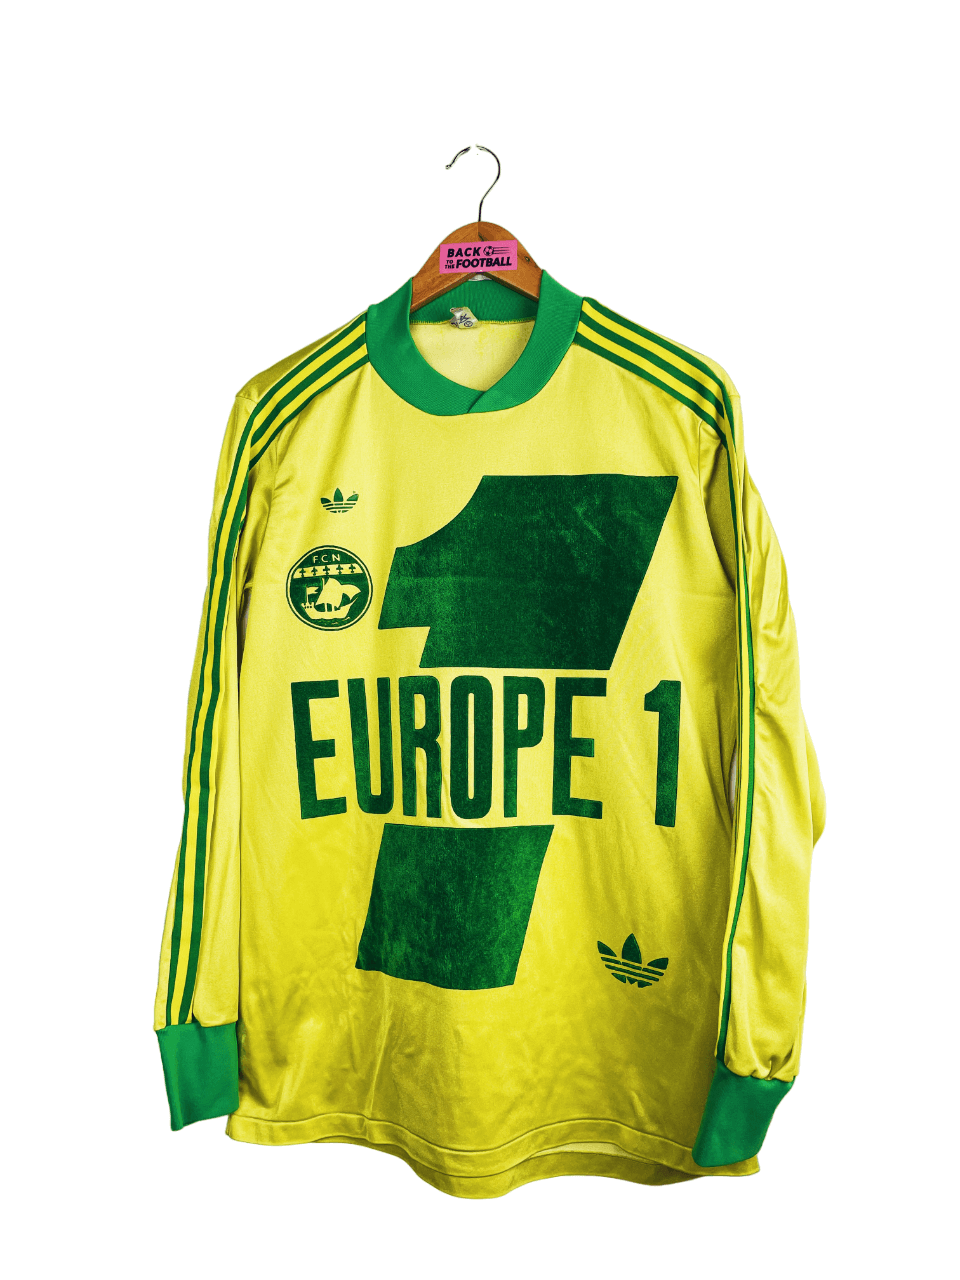 Maillots vintage FC Nantes - Back To The Football